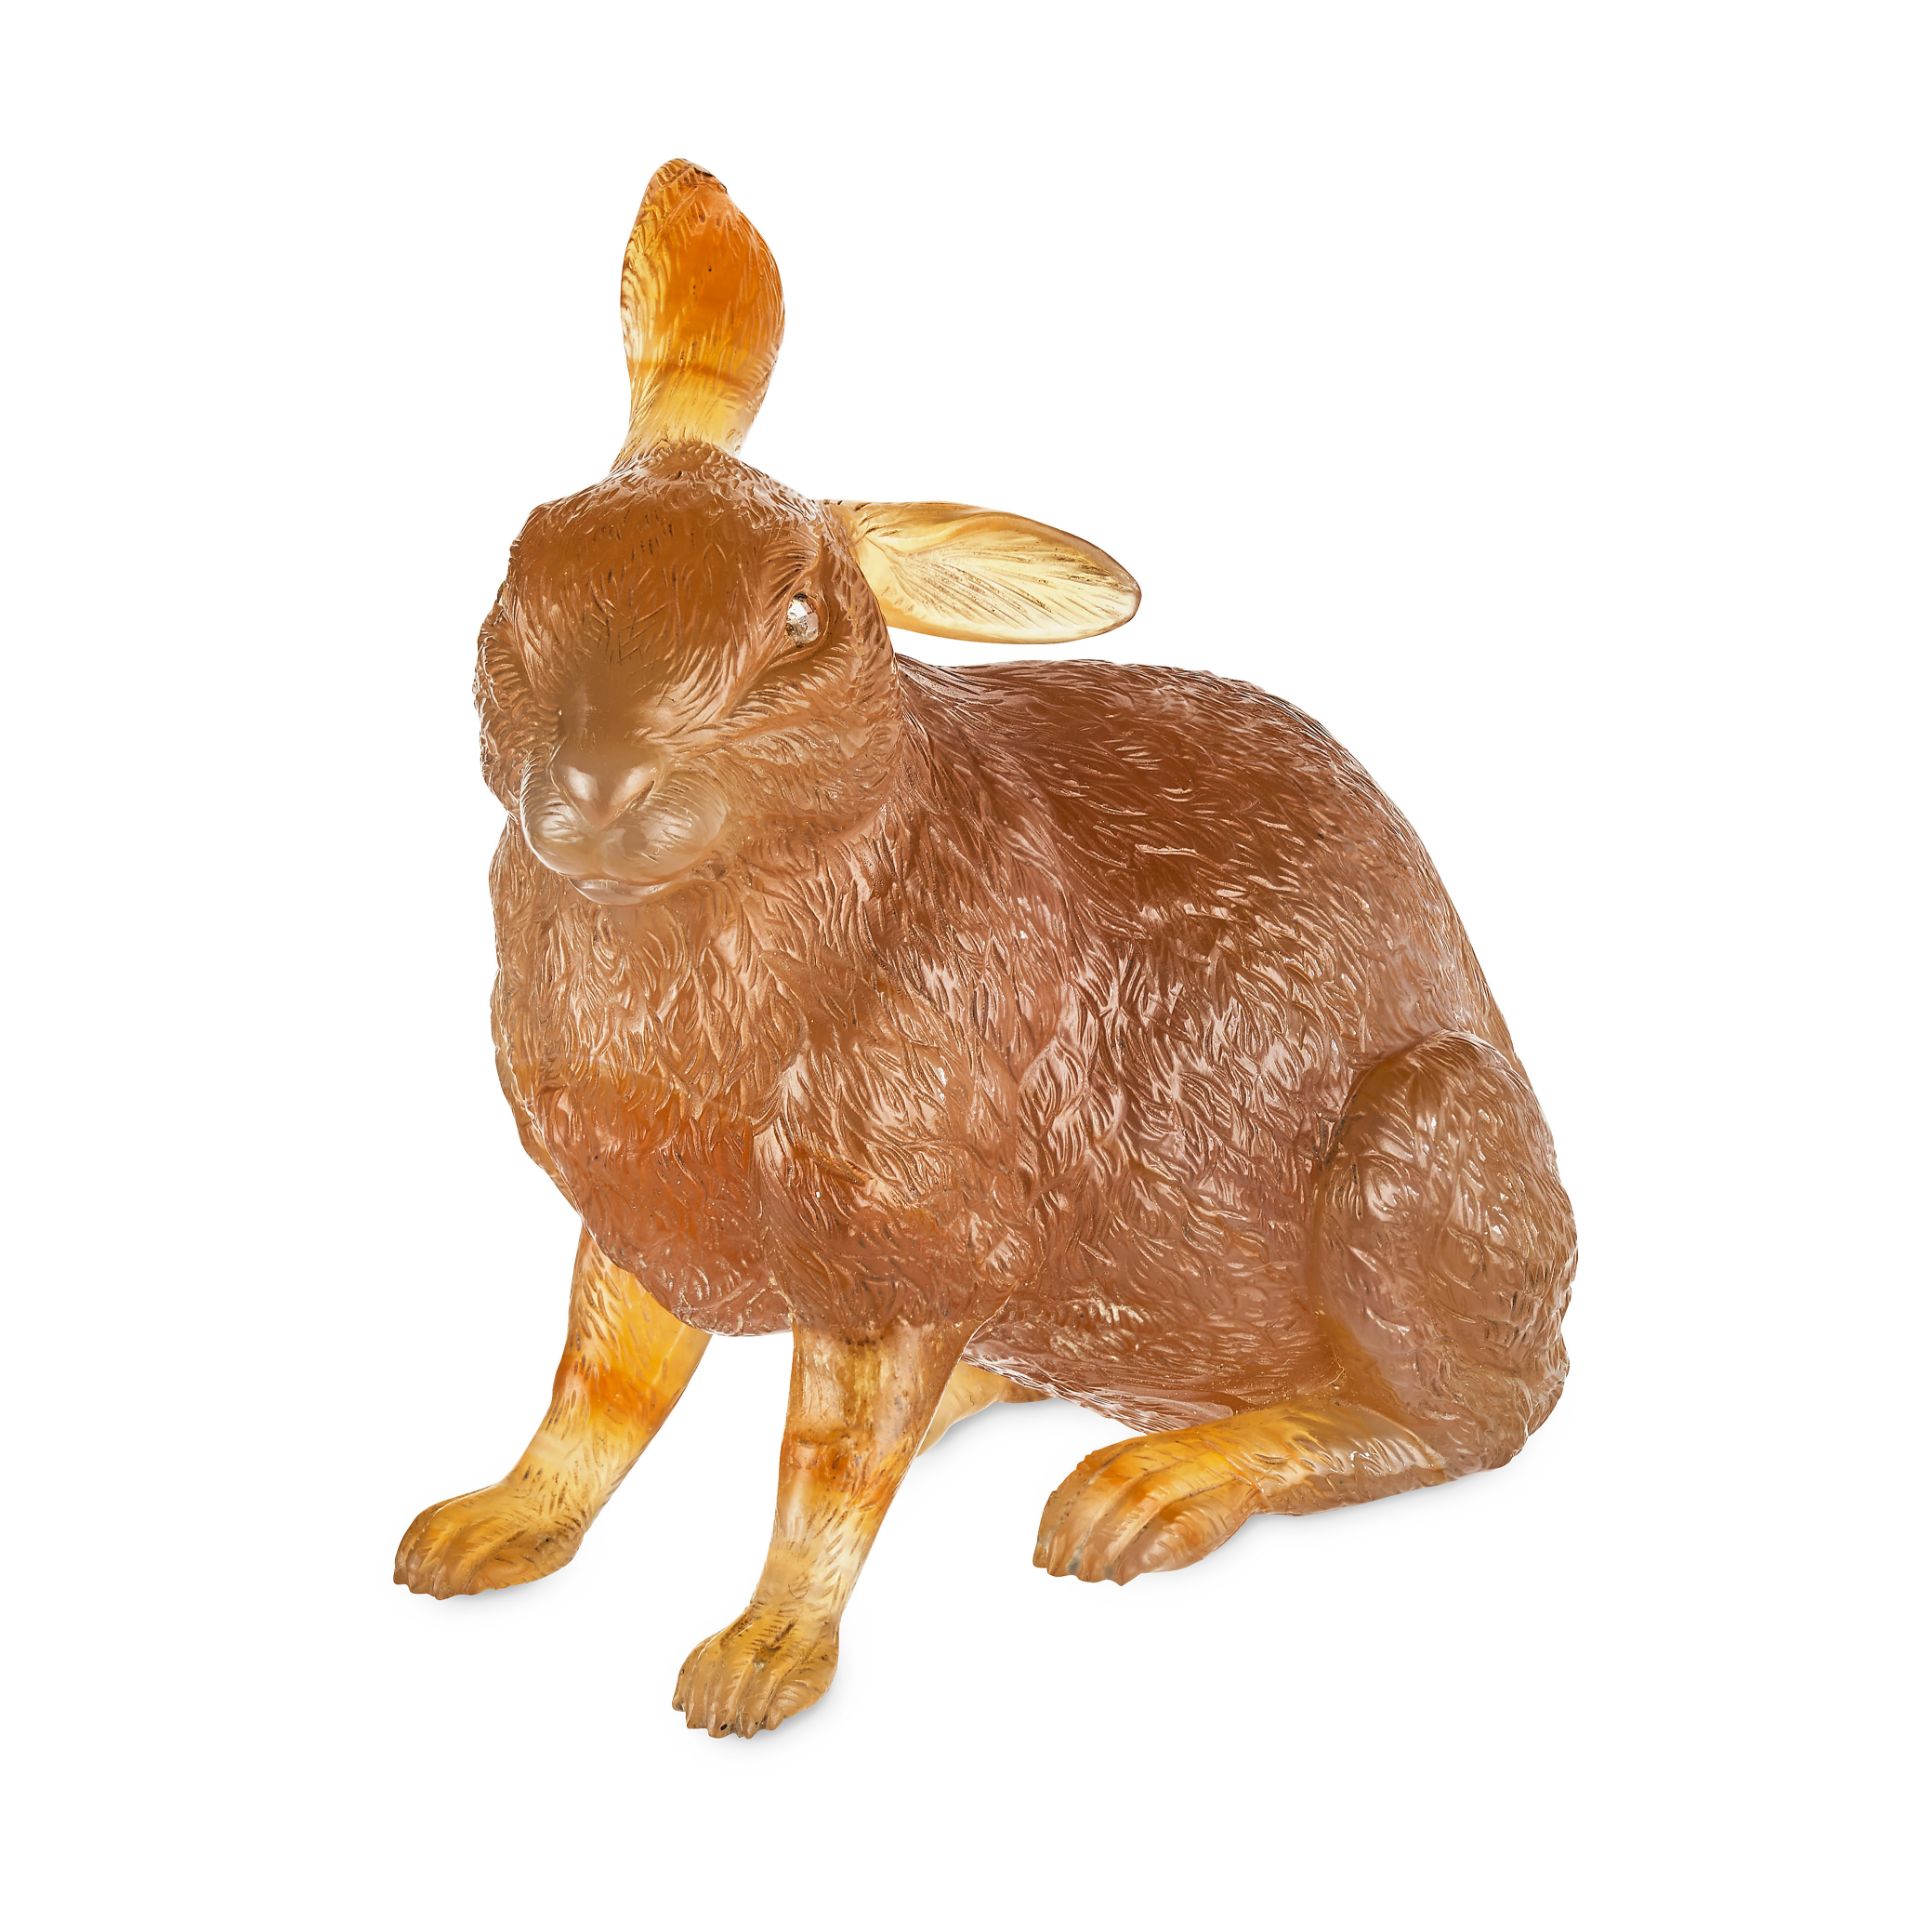 FABERGE, A JEWELLED AGATE FIGURE OF A HARE / LEVERETT, ST PETERSBURG, CIRCA 1900